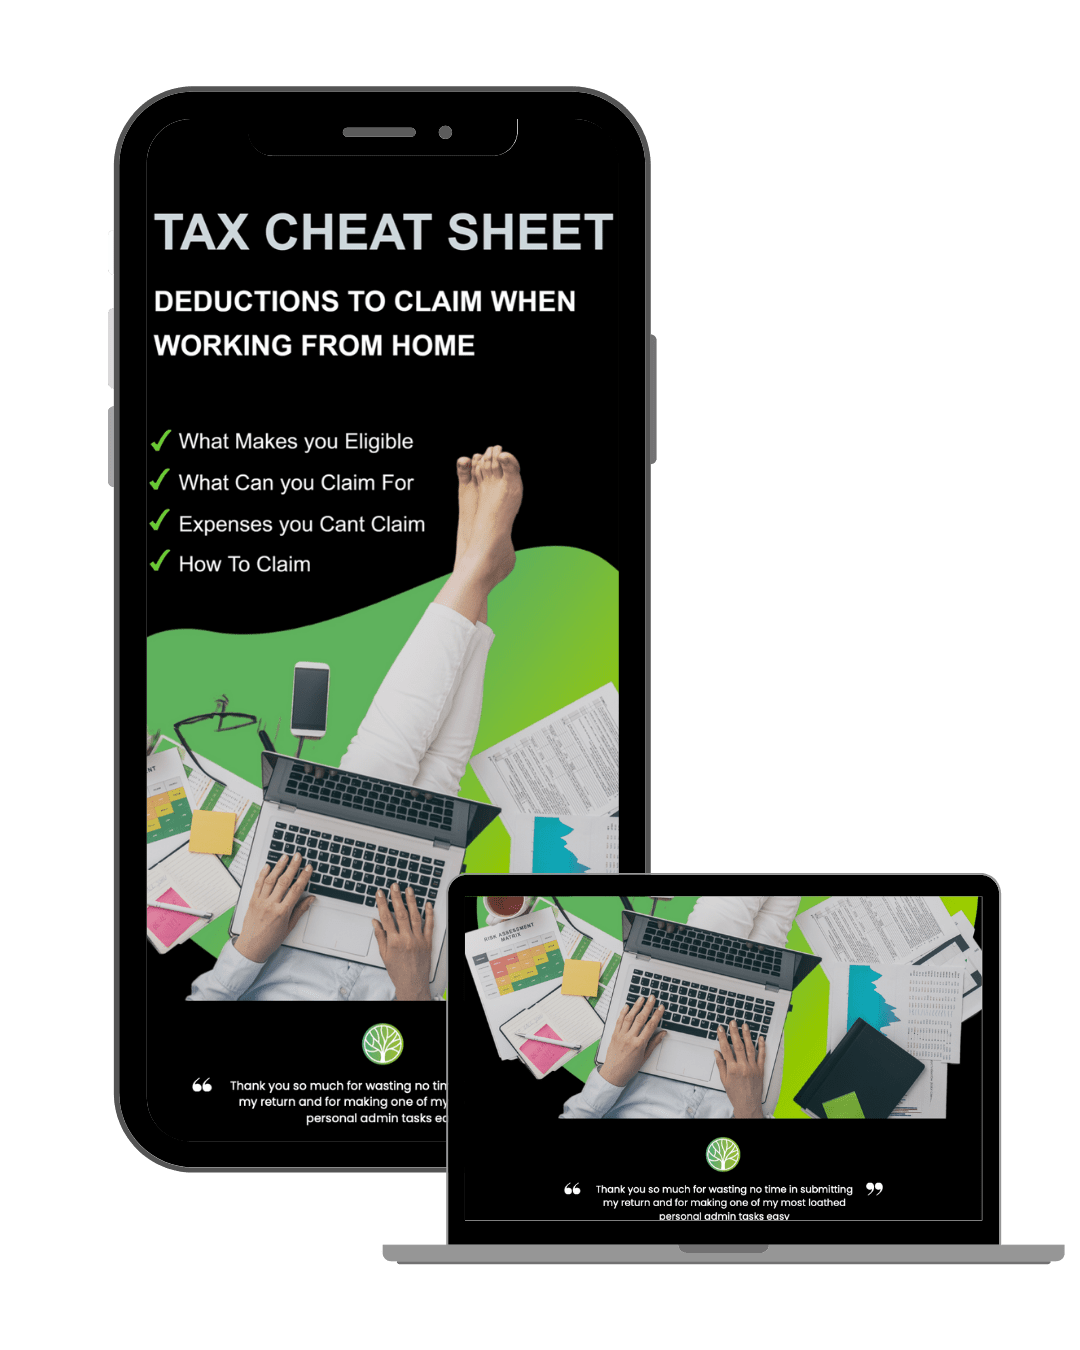 2022-23-income-year-changes-for-your-wfh-tax-deductions